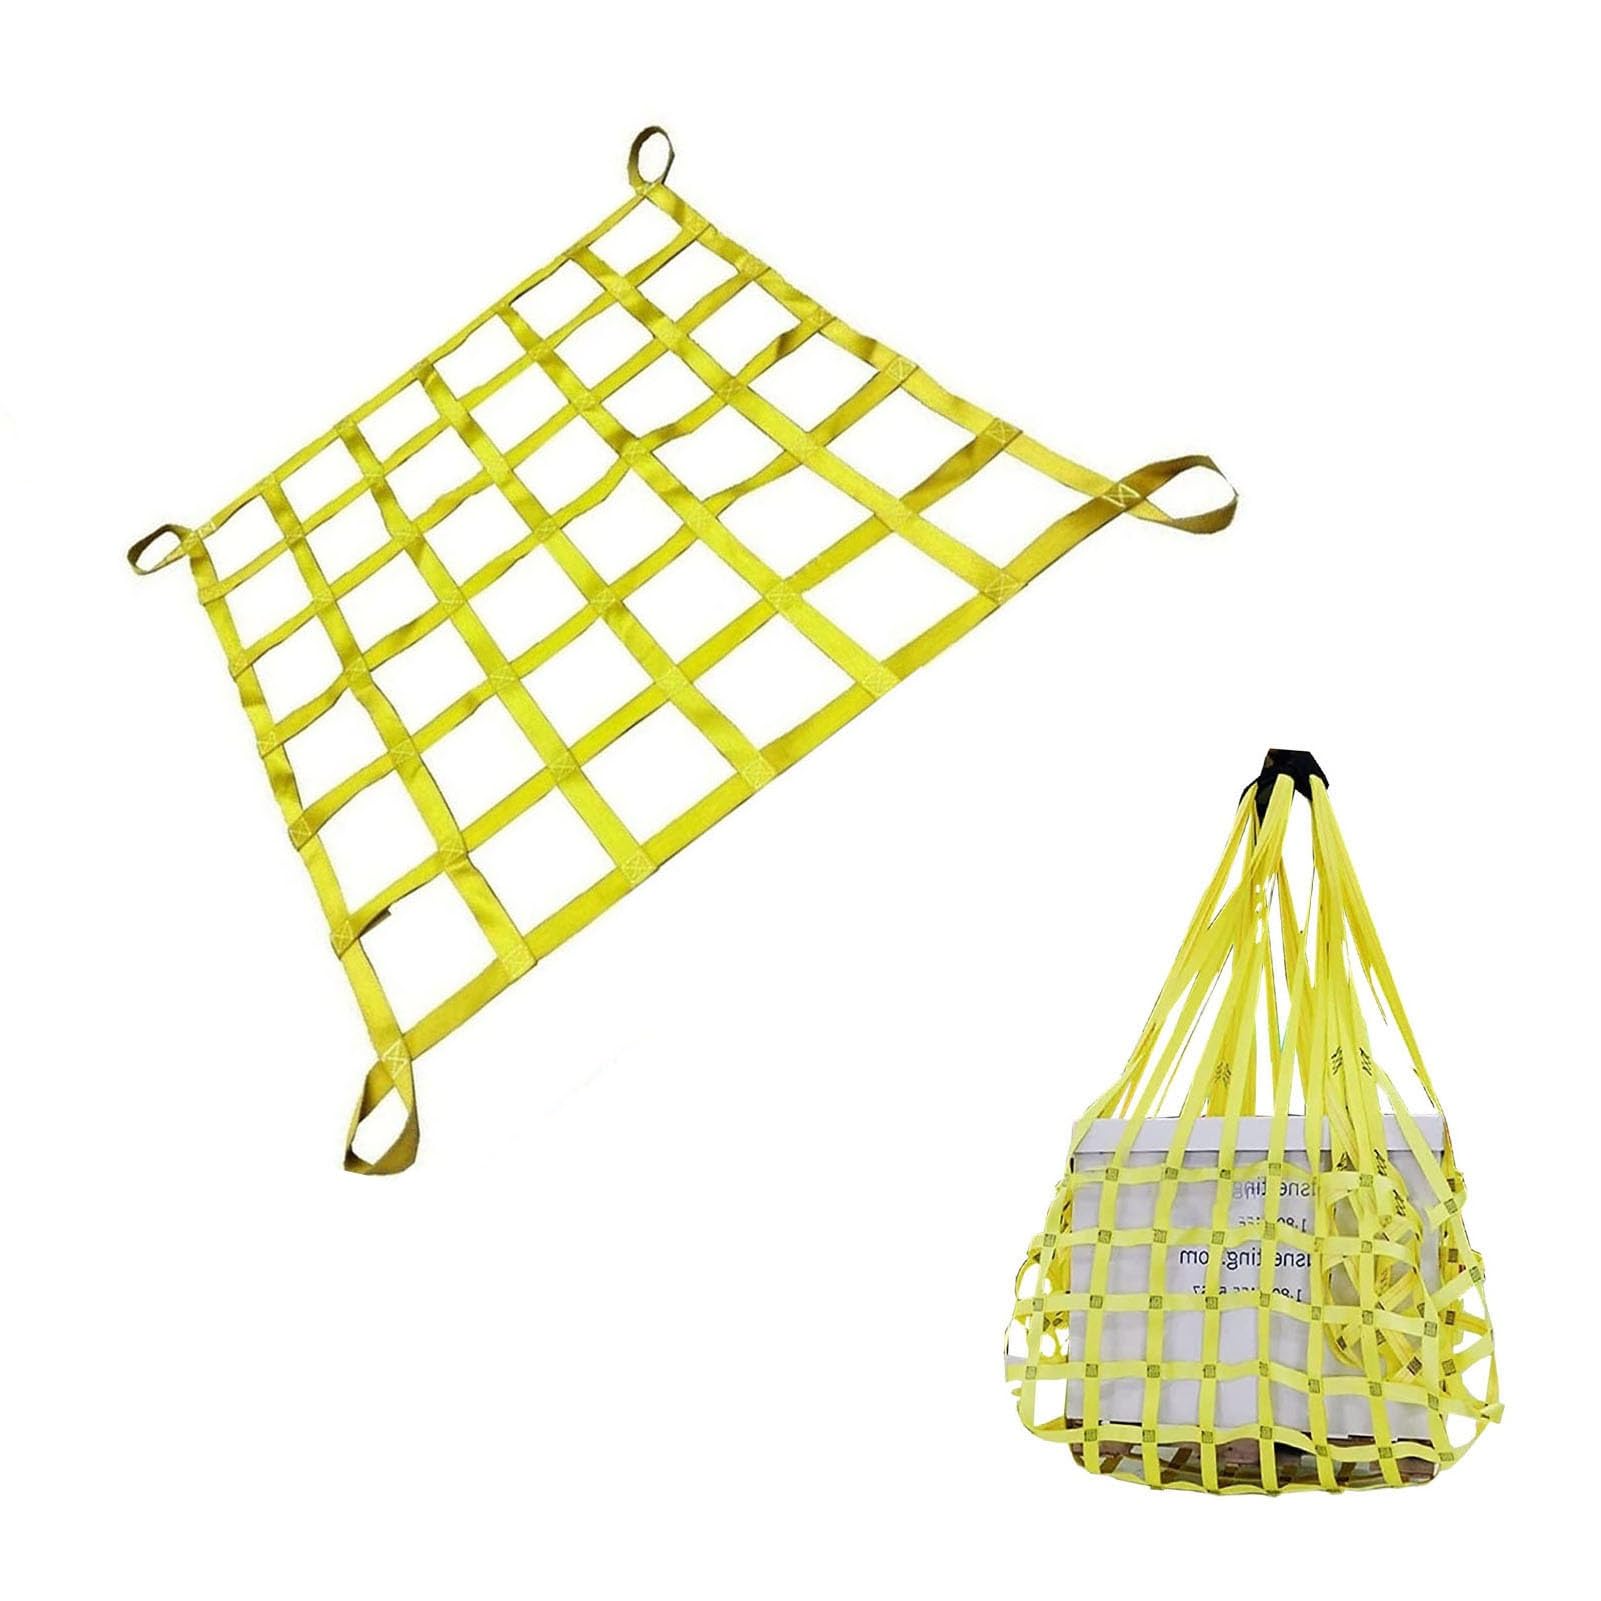 Cargo Lifting Net - Hanging Netting for Towing Heisting, Cargo Net for Pickup Truck Beded, Lifting Cargo Net, Flat Polyester Sling Hoisting Net Square Mesh Tear Resistance Safety Net Straps (1 X von WYRMB